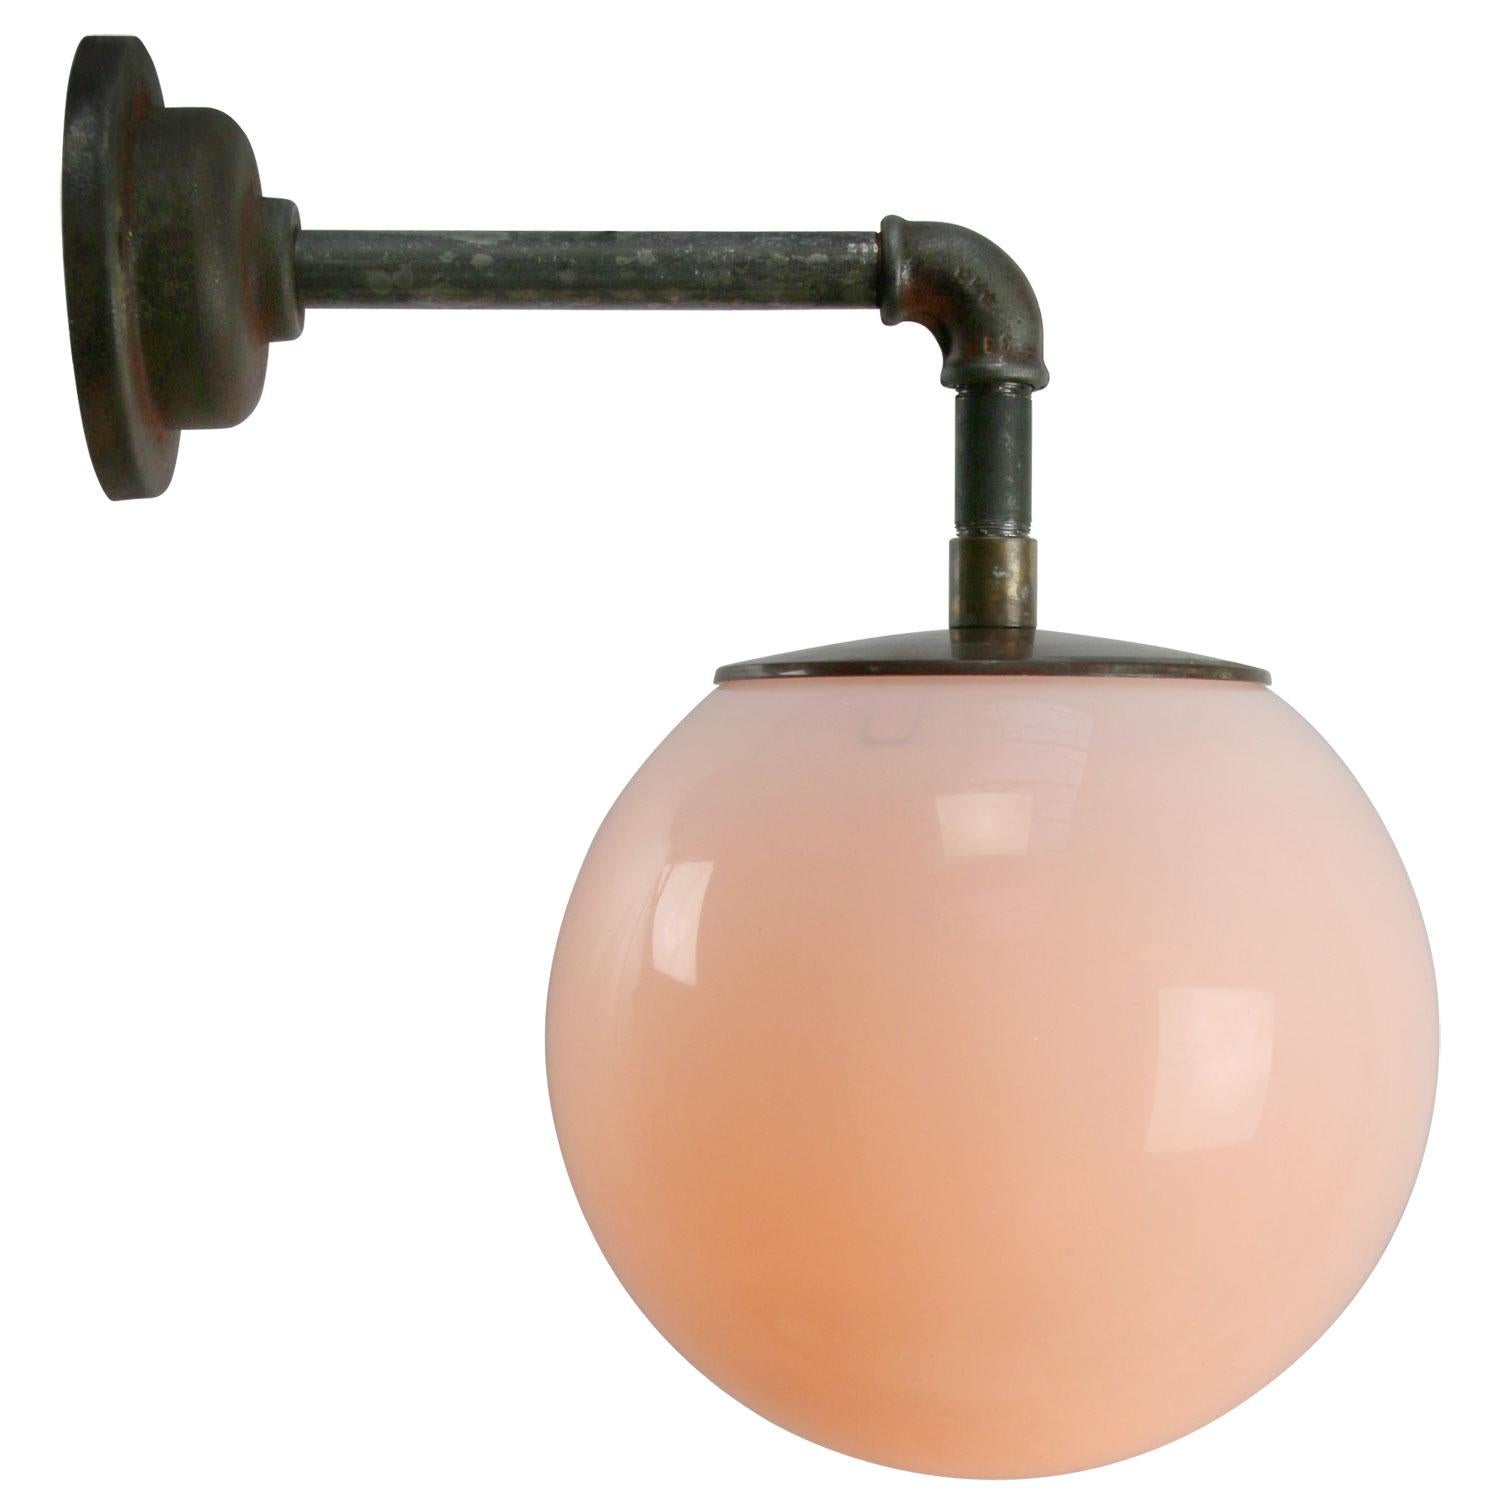 Opaline glass industrial wall light.
Brass top.

Measures: Diameter cast iron wall piece 10.5 cm / 4”, 2 holes to secure

Weight: 4.80 kg / 10.6 lb

Priced per individual item. All lamps have been made suitable by international standards for